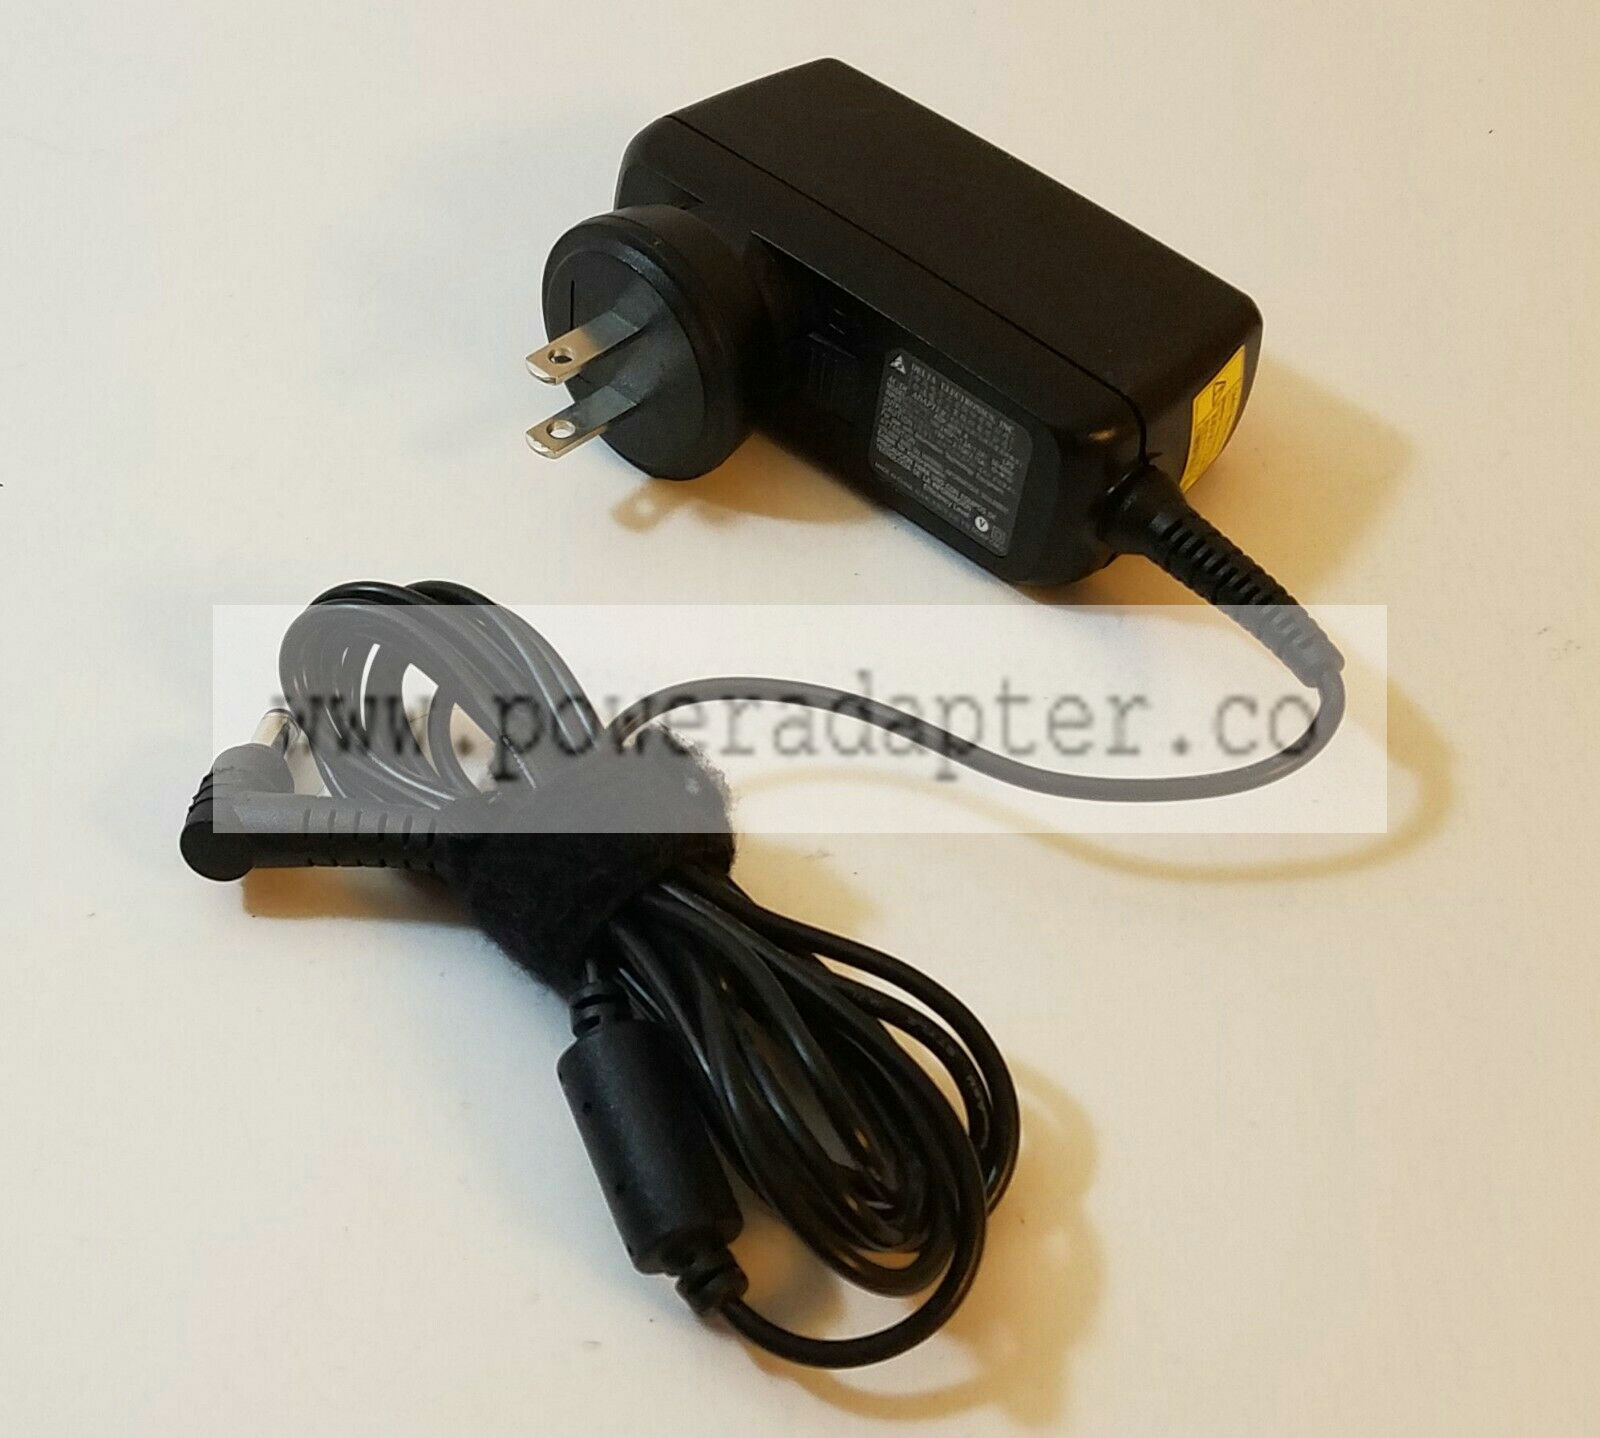 Genuine Delta AC to DC Adapter Charger ADP-40TH A 19V 2.15A Acer Aspire One Output Voltage(s): 19 V Brand: Delta Typ